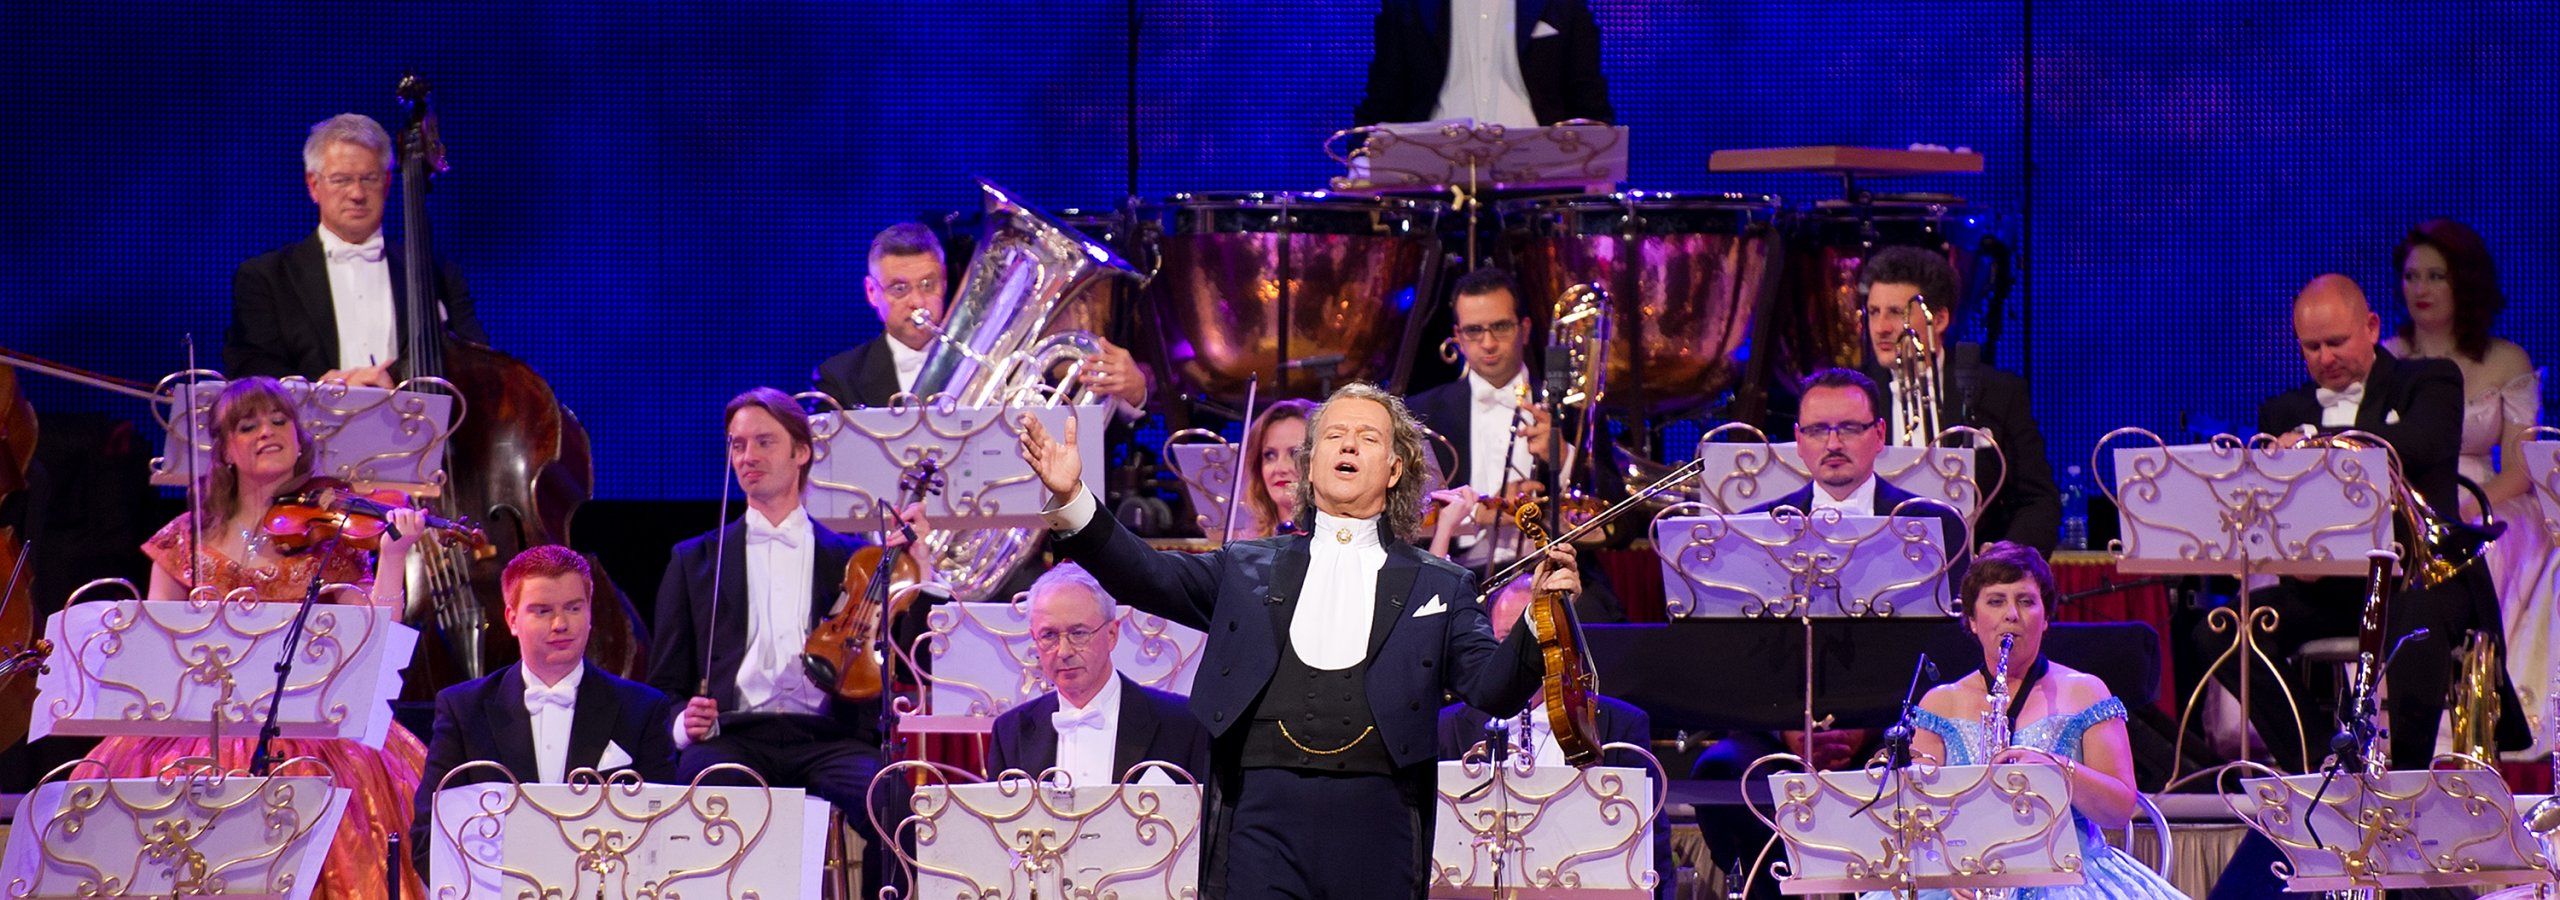 Andre Rieu with Johann Strauss Orchestra banner2